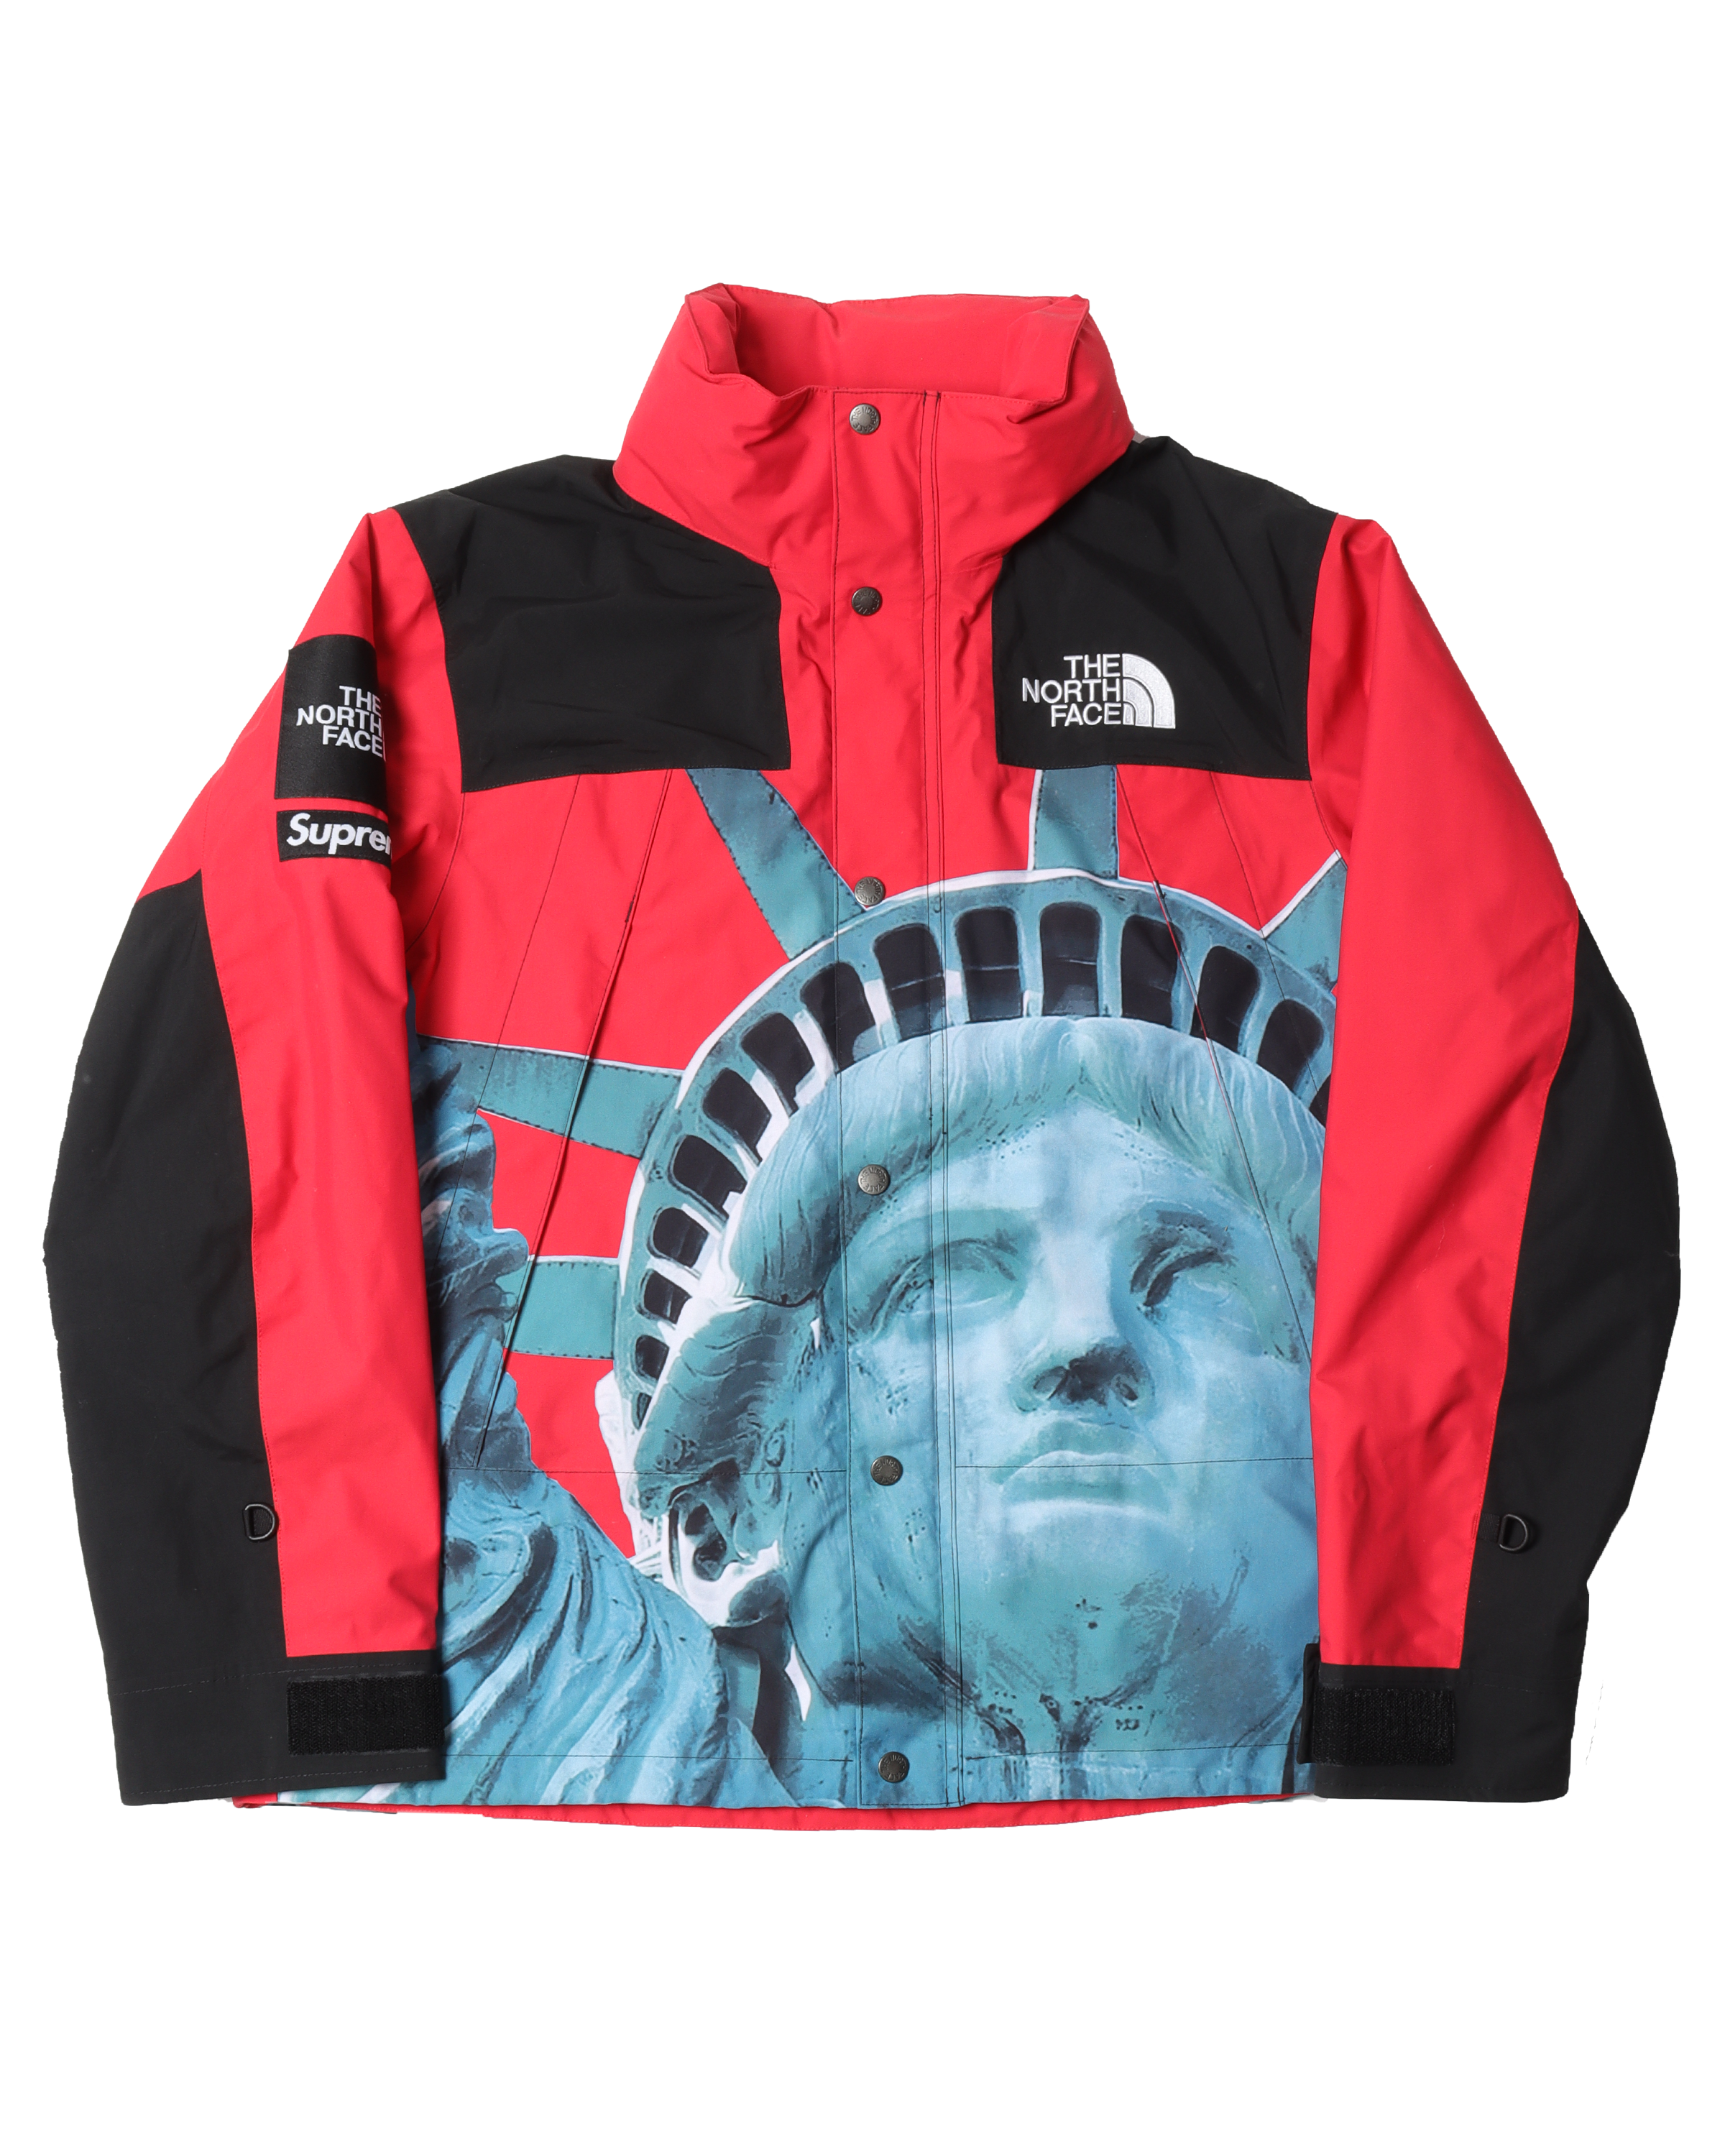 The North Face Liberty Mountain Jacket